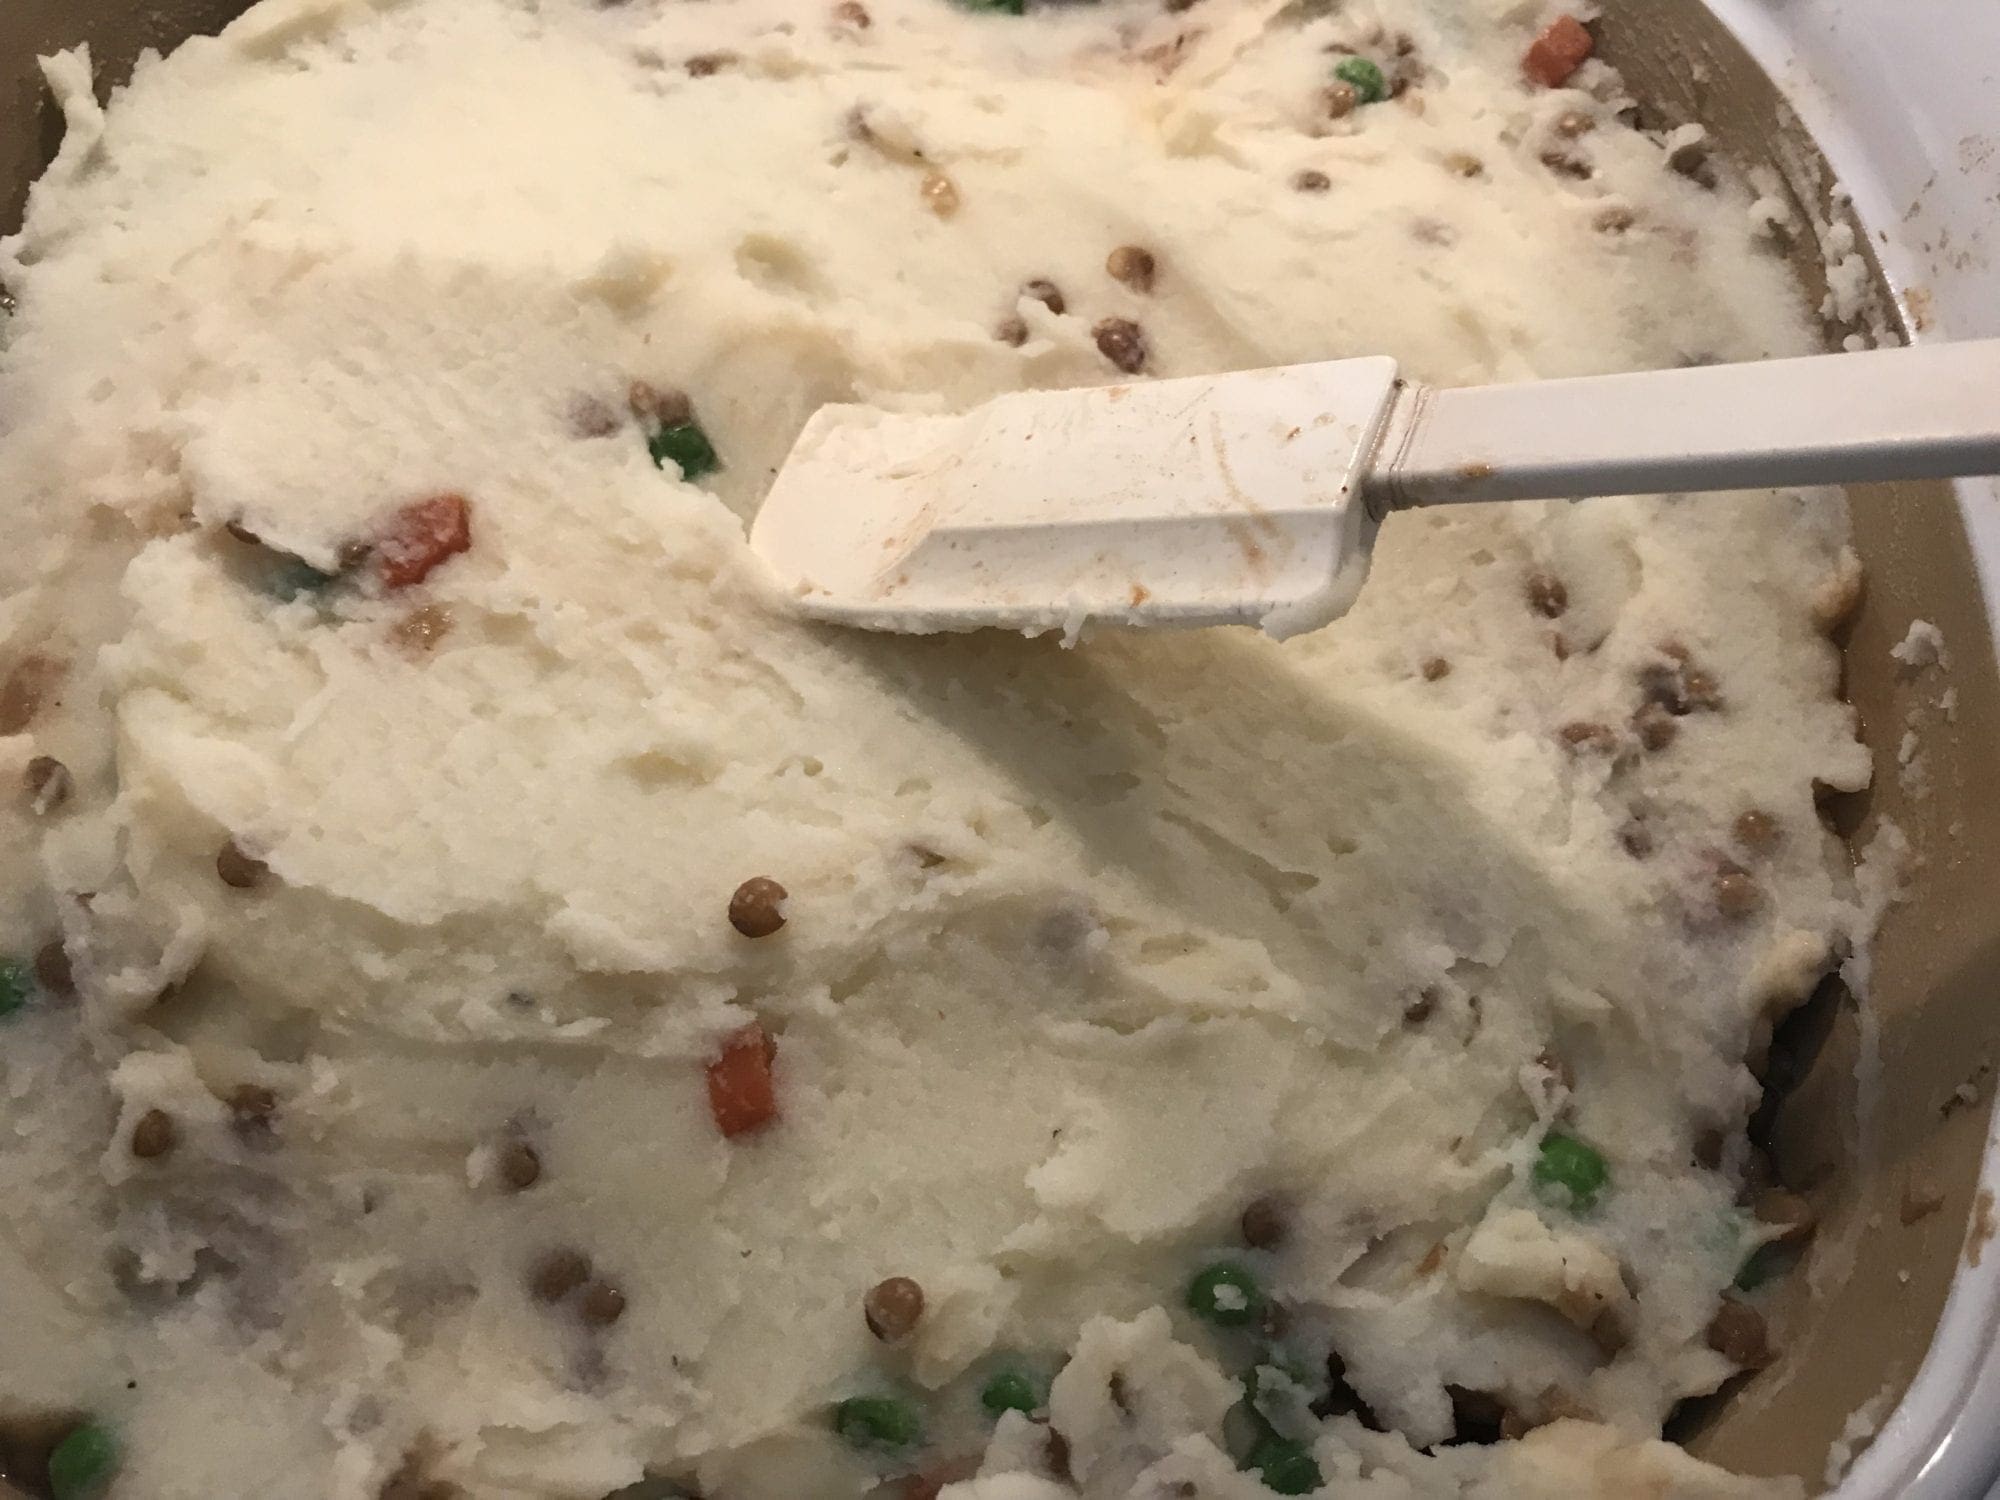 top lentil mixture with mashed potatoes